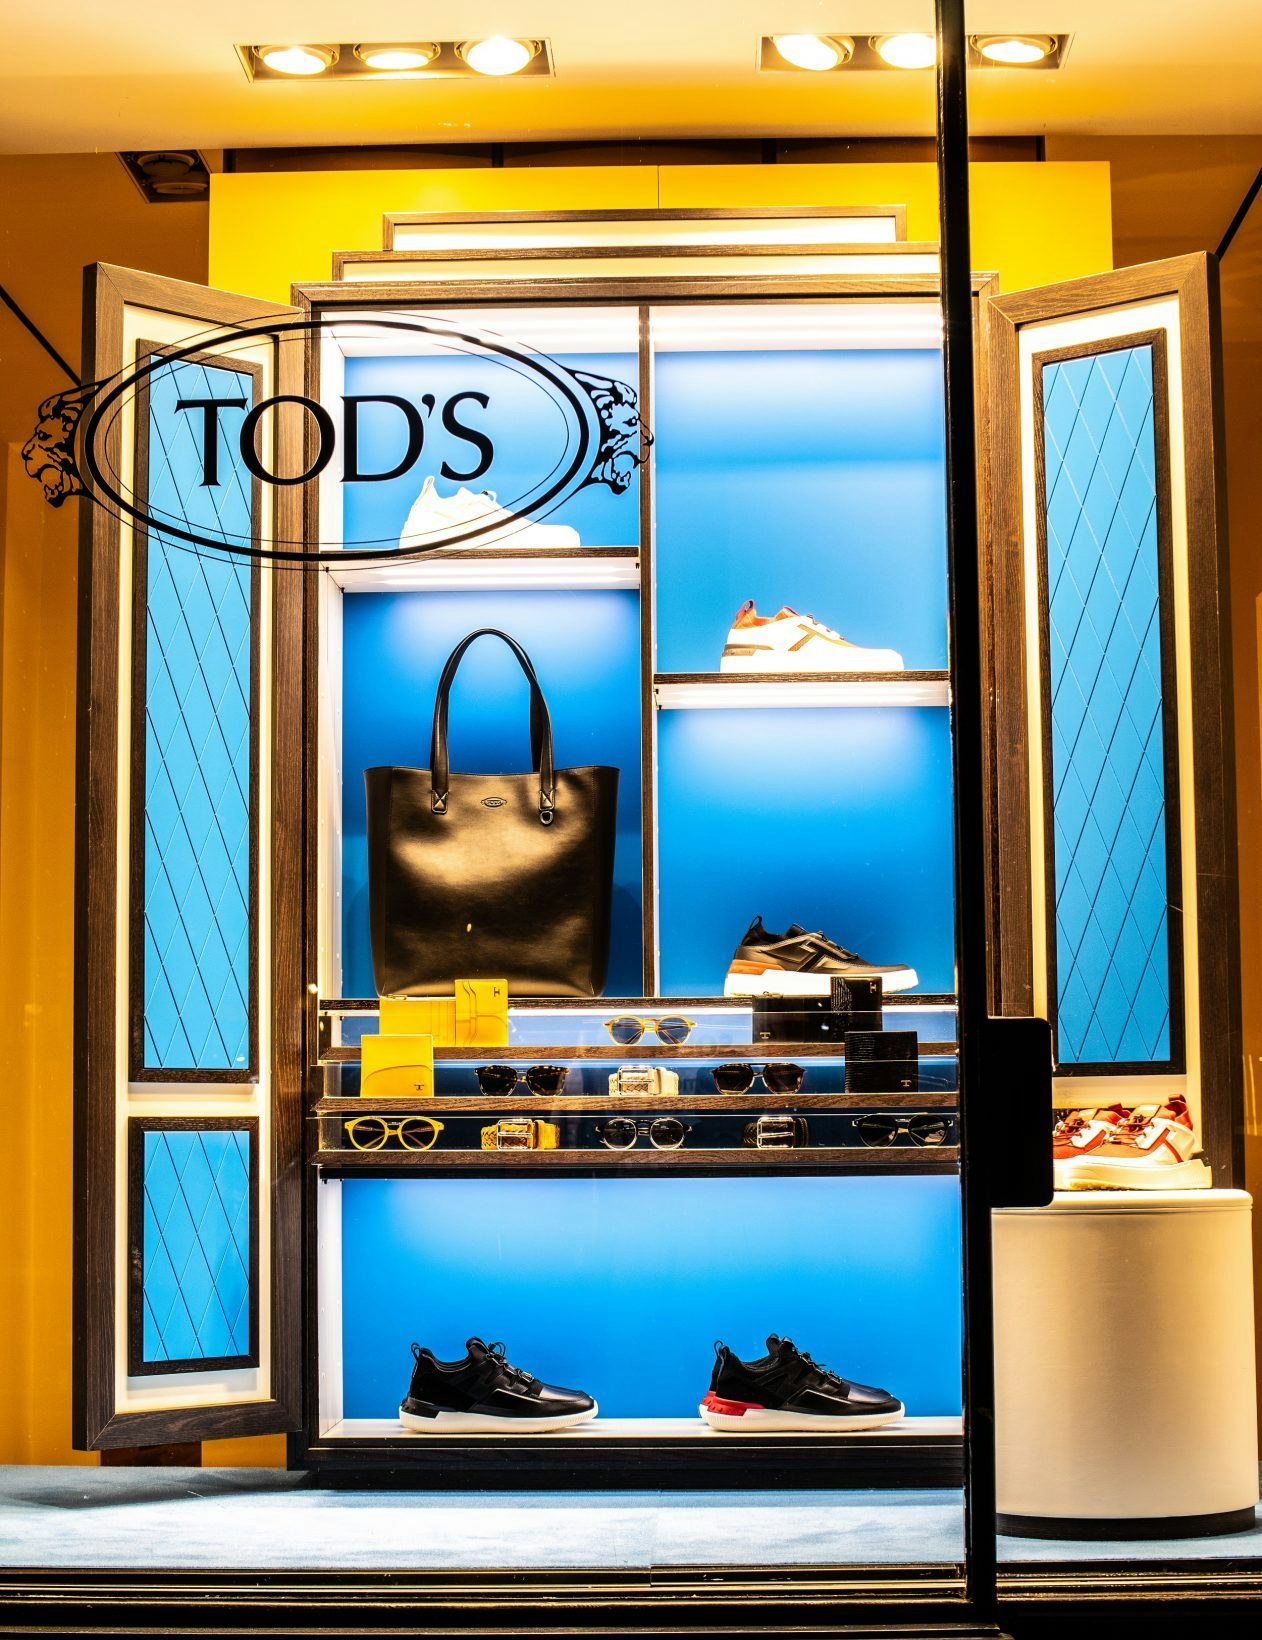 The Della Valle family launches a takeover bid for Tod’s